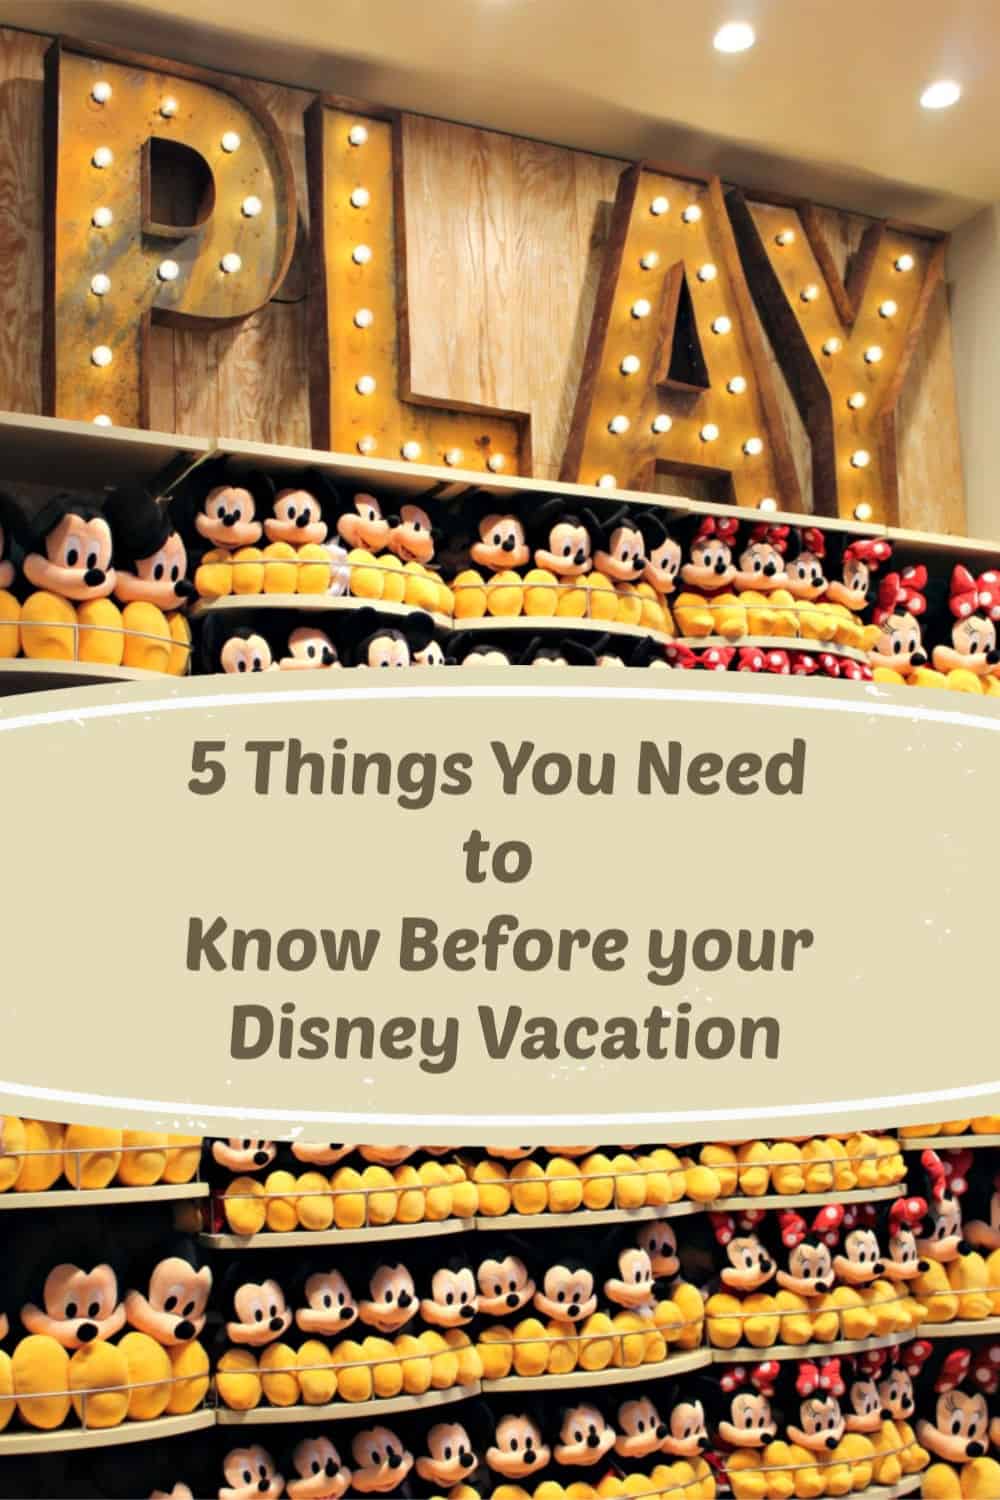 5 Things You Need to Know Before your Disney Vacation - Avoid a bad Disney trip and make sure you know these things before planning your Disney vacation